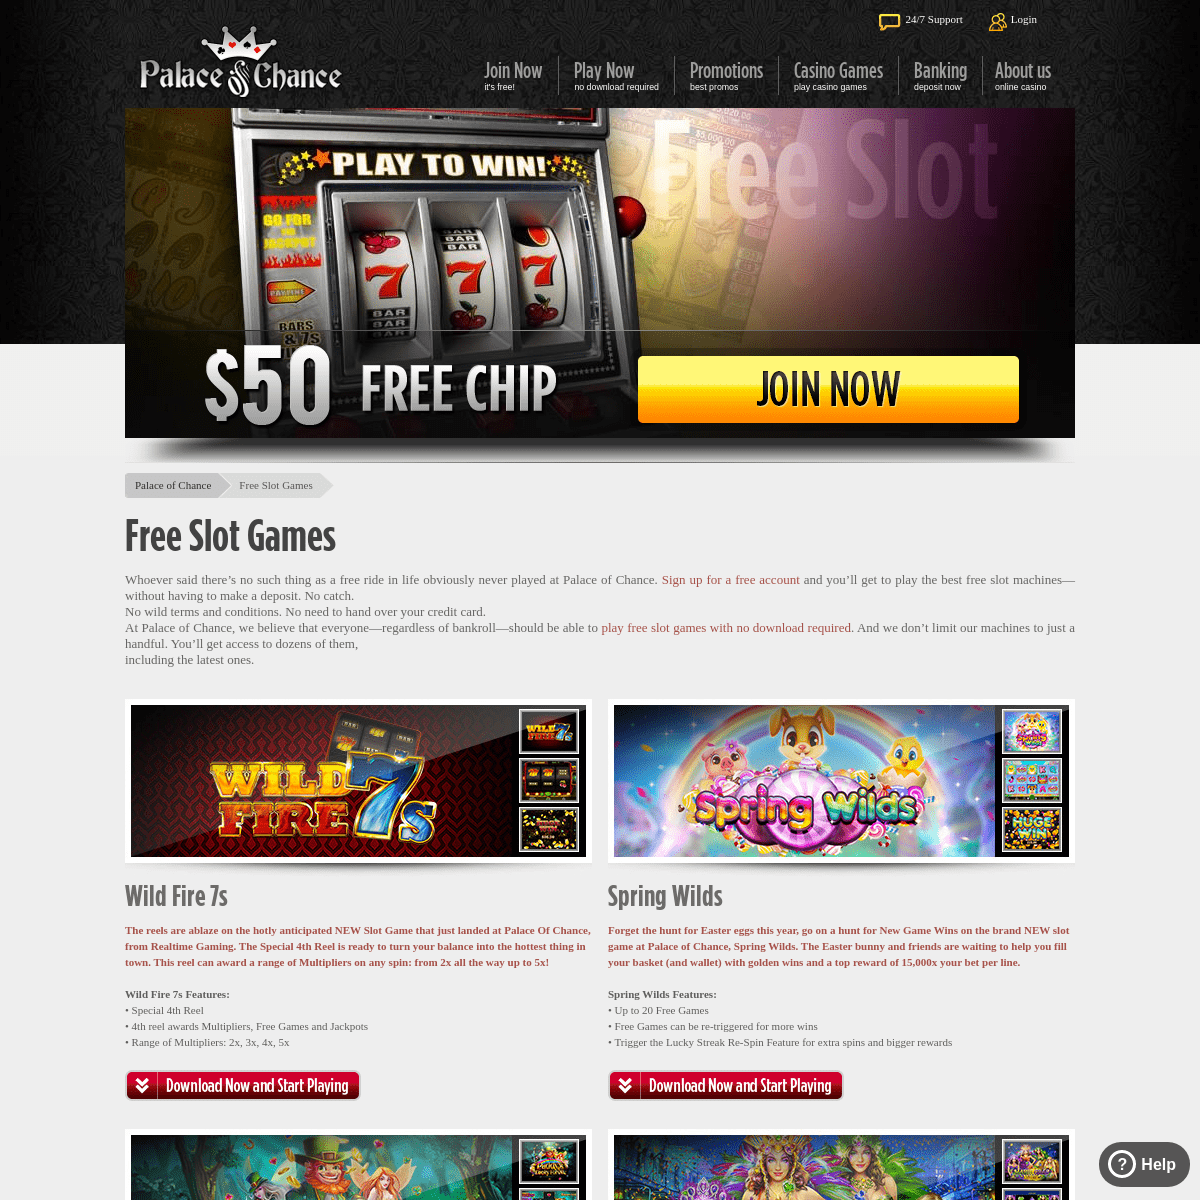 A complete backup of https://www.palaceofchance.com/free-slot-games/